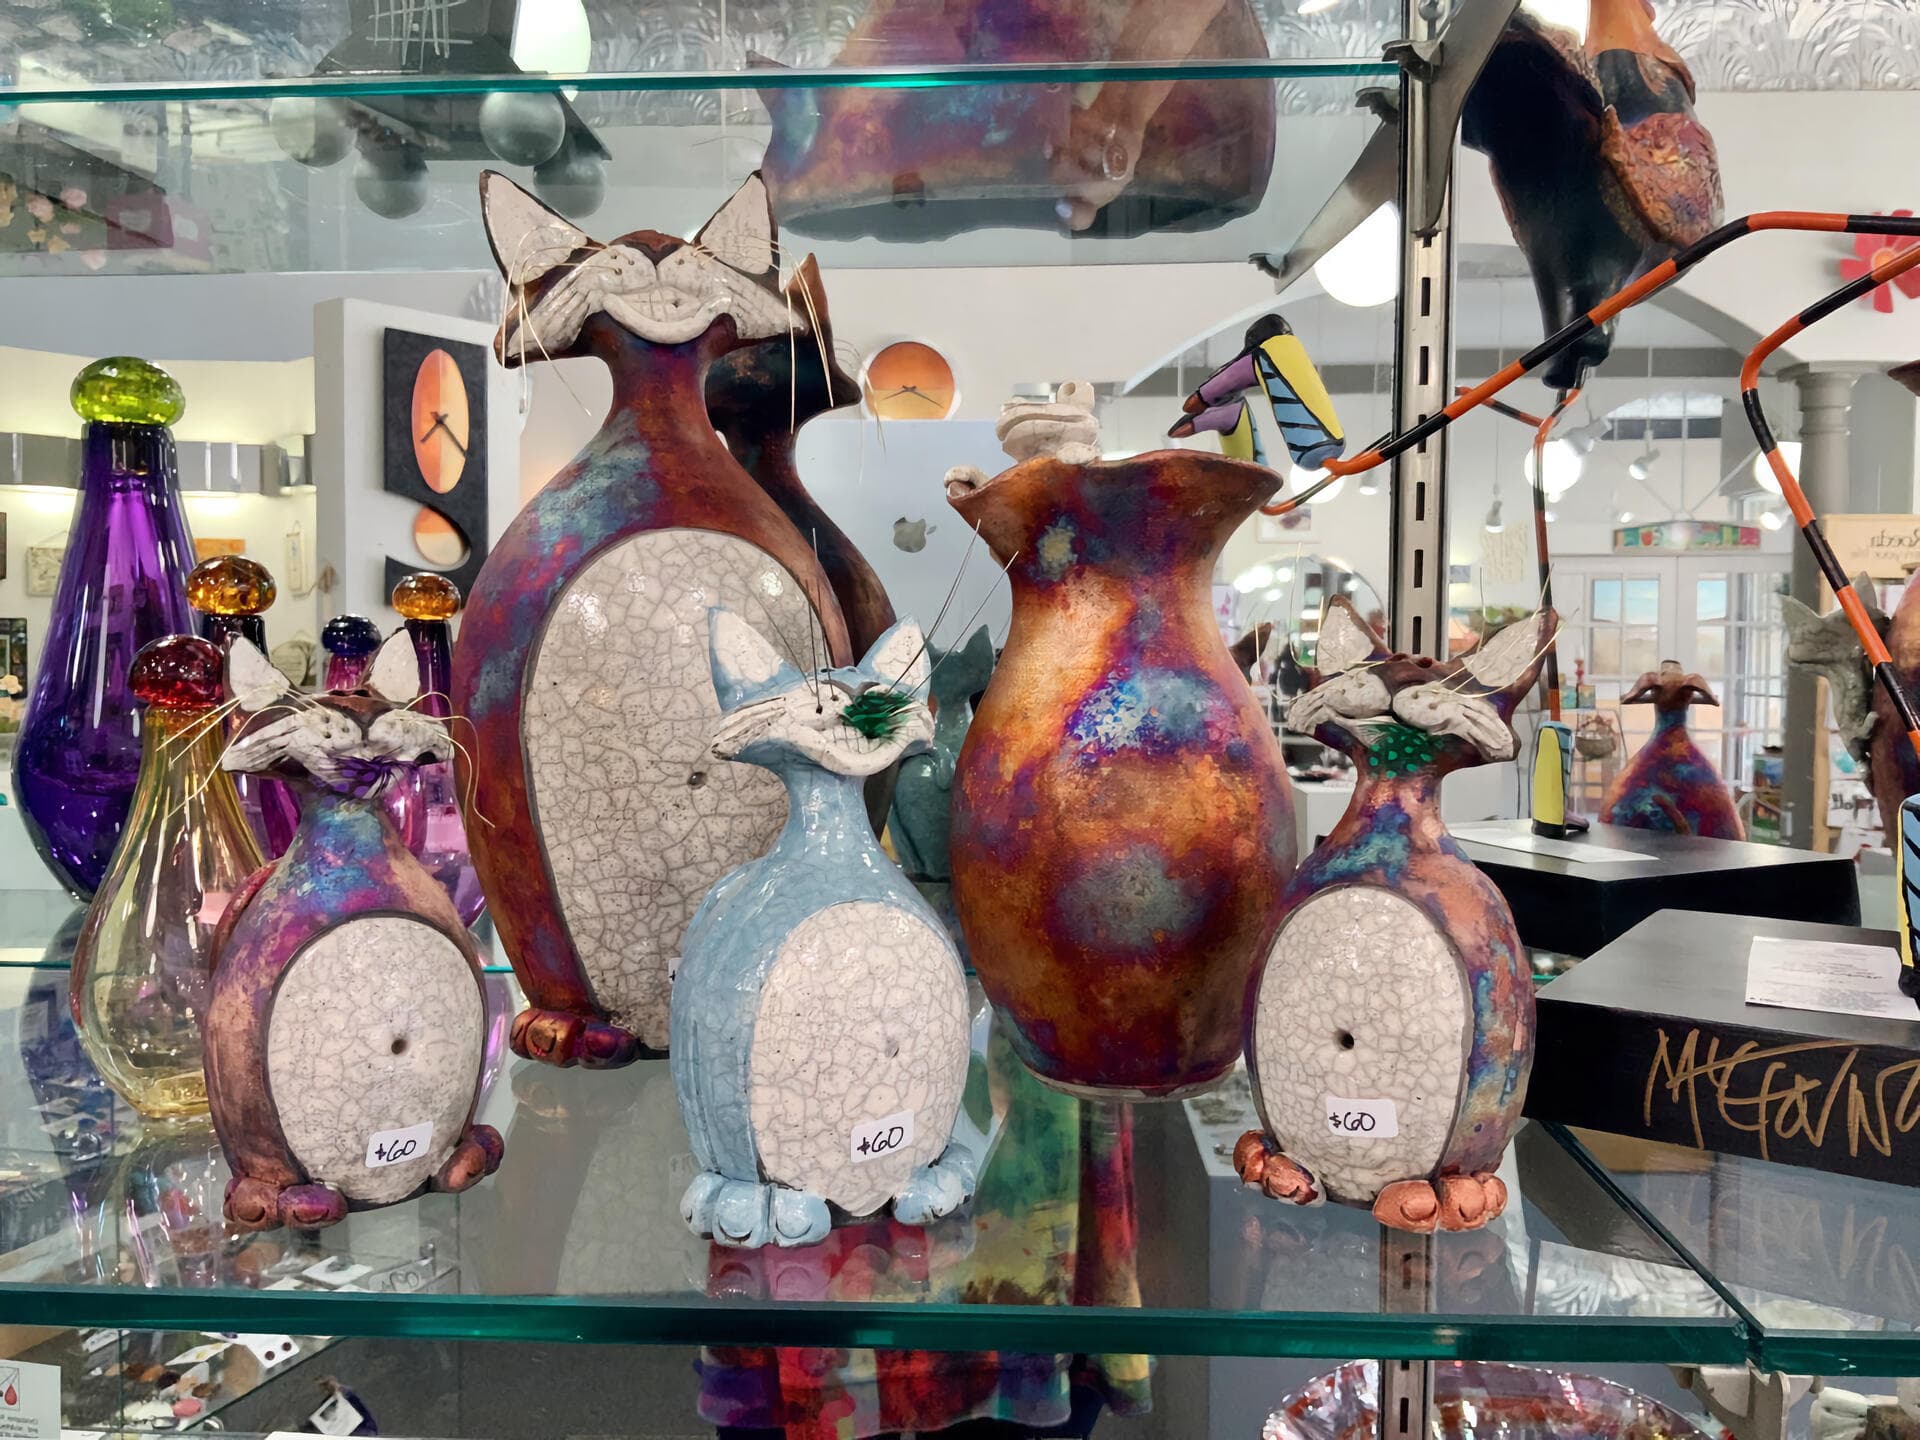 Gallery on the Alley is proud to present roundTreePottery